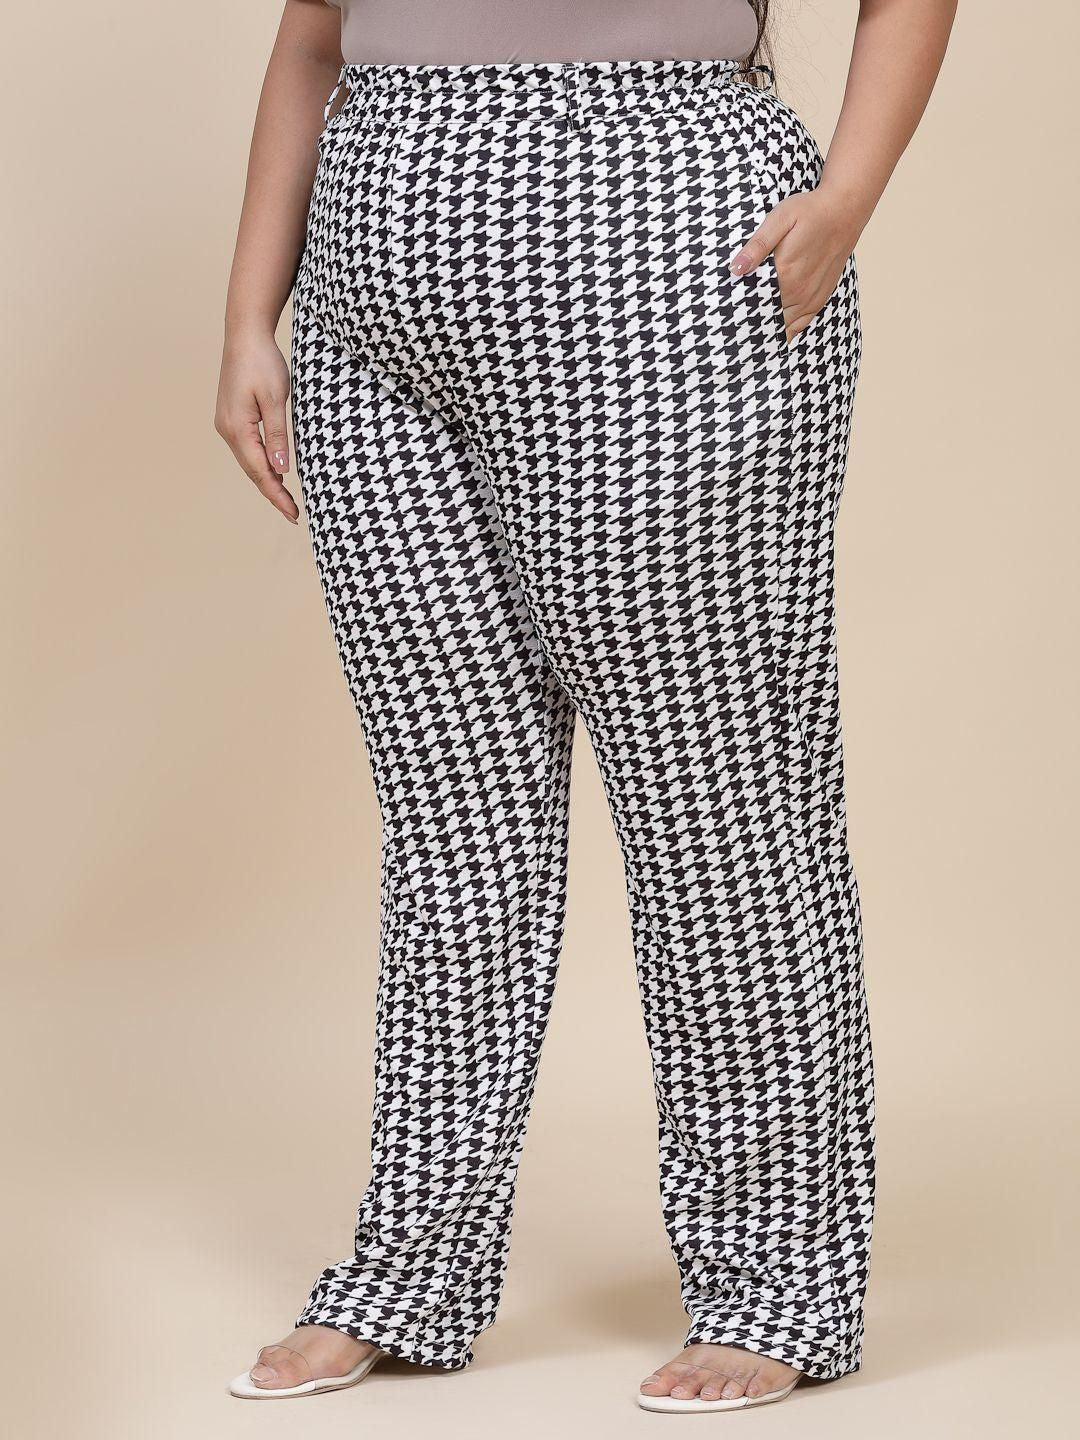 Flambeur Women's Plus Size Casual Printed Trouser